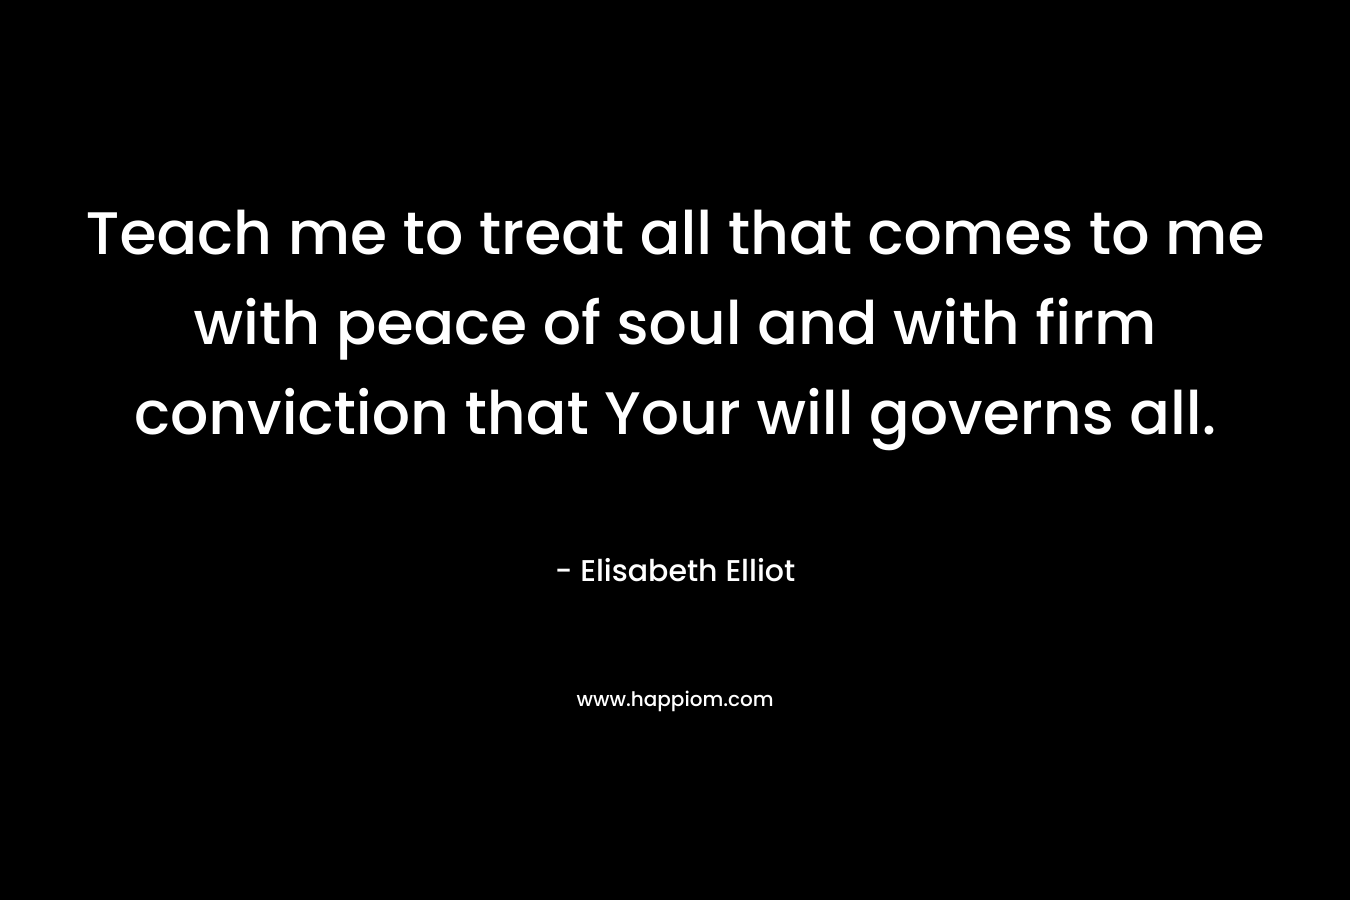 Teach me to treat all that comes to me with peace of soul and with firm conviction that Your will governs all. – Elisabeth Elliot